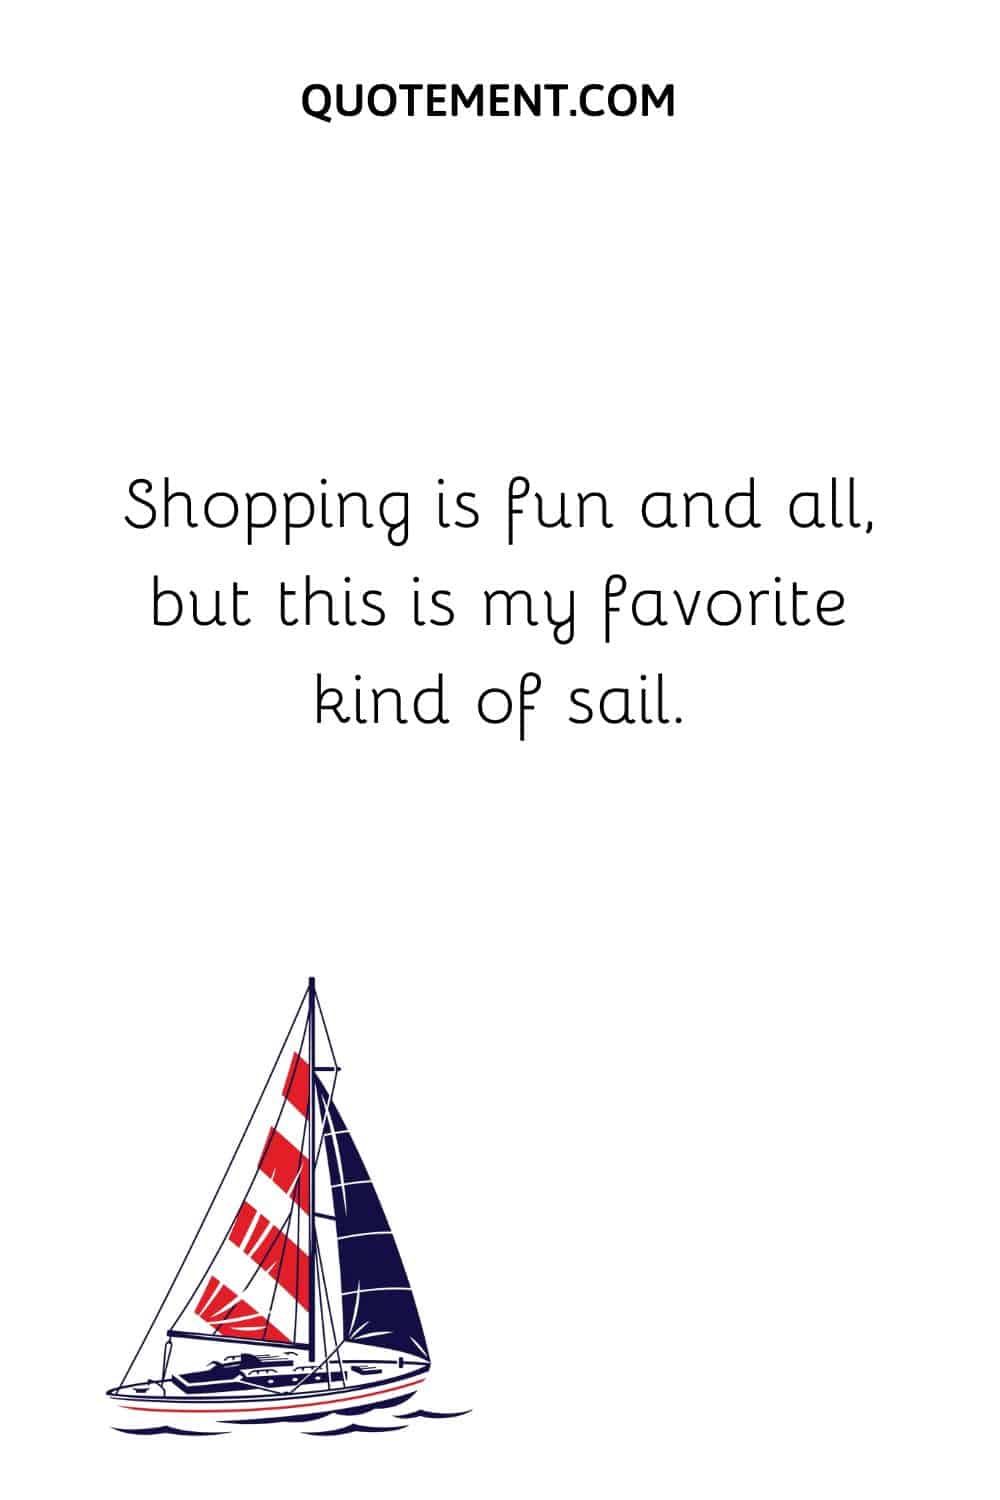 Shopping is fun and all, but this is my favorite kind of sail